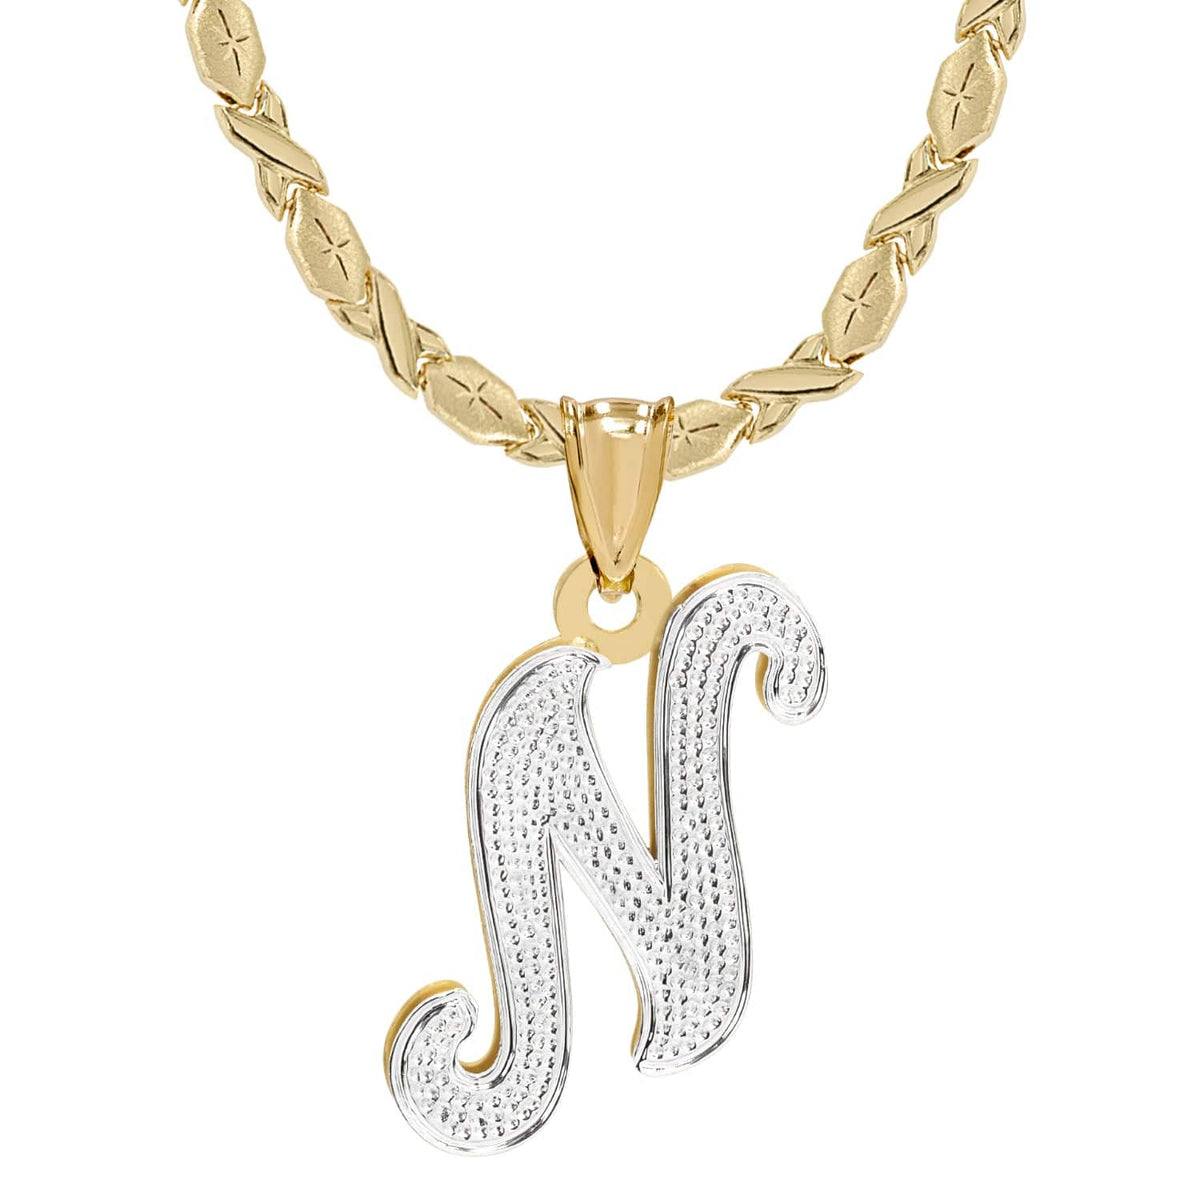 Two-Tone. Sterling Silver / Xoxo Chain Initial Necklace - Double Plated with Beaded Finish with Xoxo chain